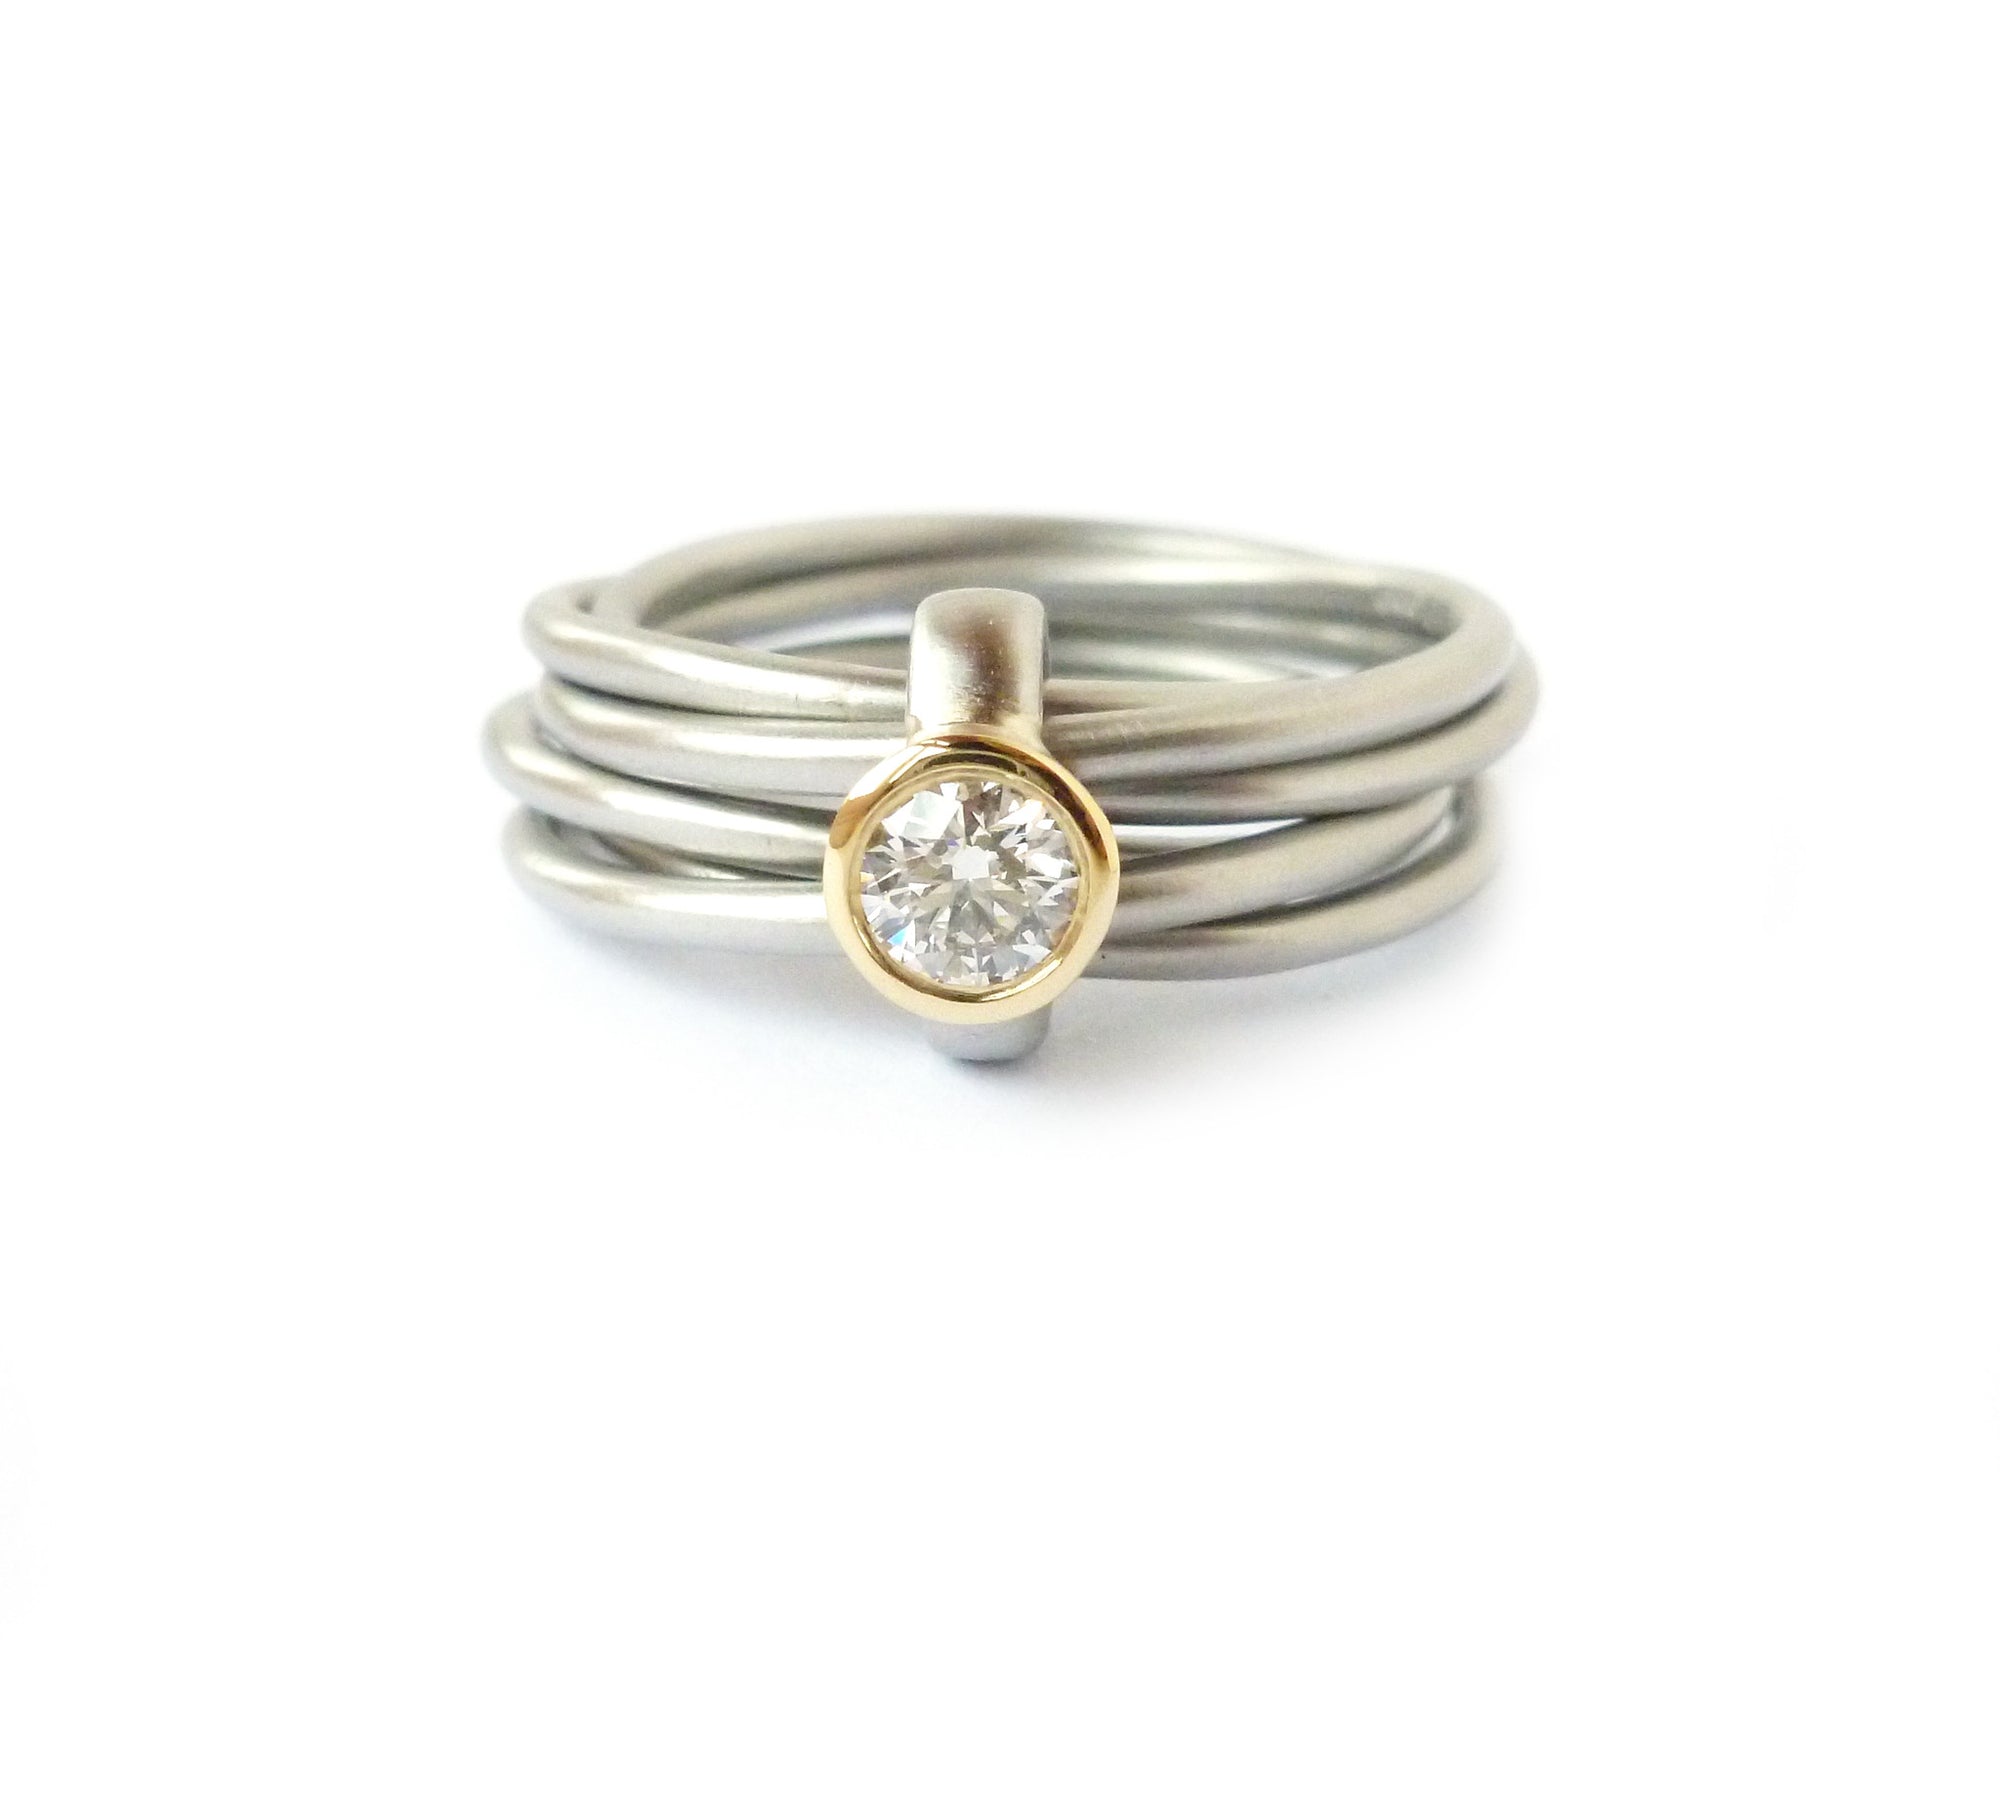 Unusual, unique, bespoke and modern Russian style platinum and diamond wedding ring, contemporary engagement ring, Handmade by Sue Lane in Herefordshire. Multi band ring or interlocking ring.